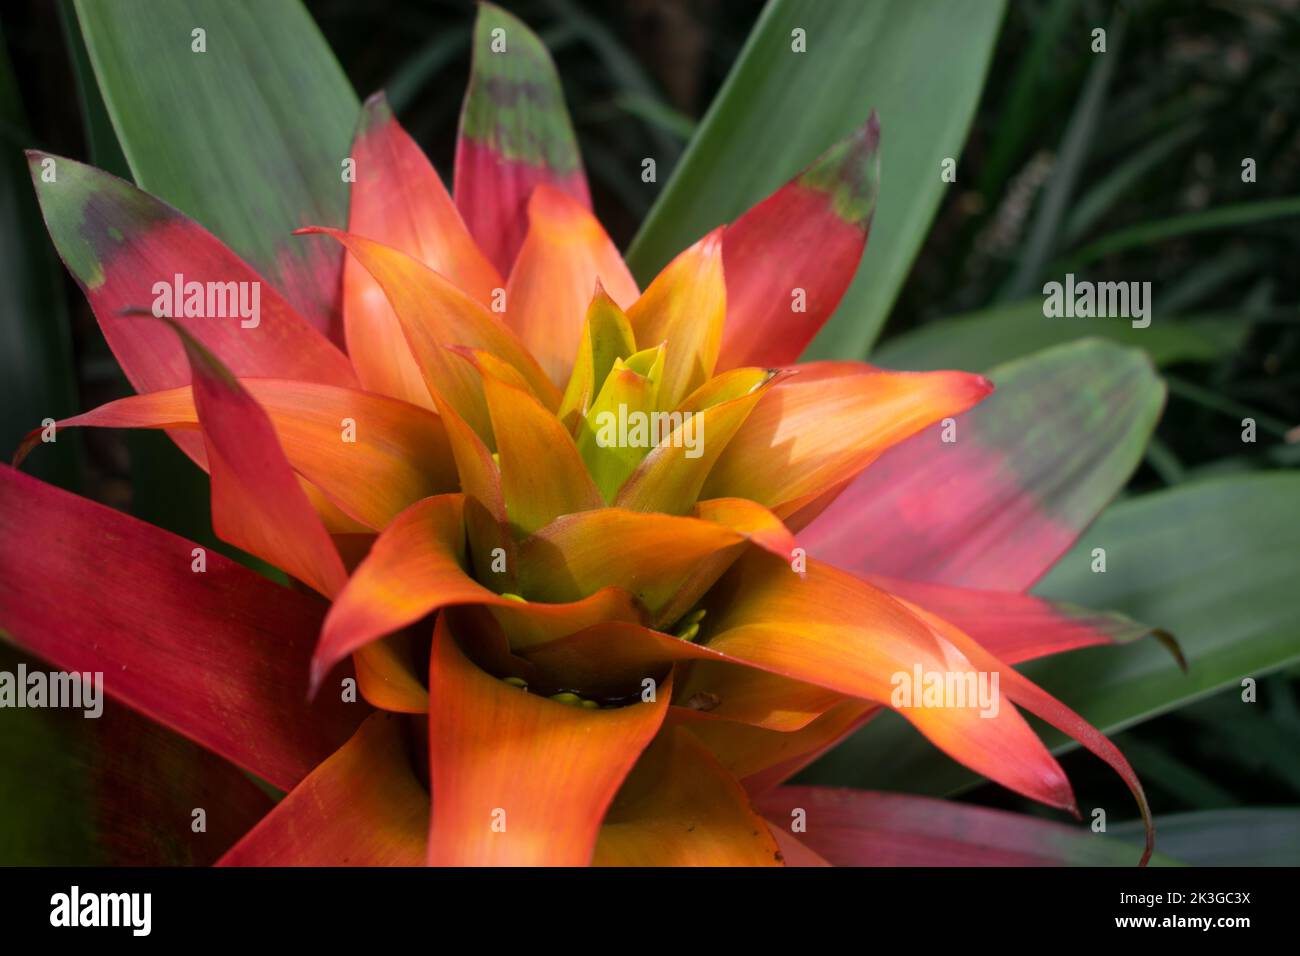 bromeliad beautiful tropical plant or flower with deep calyx and orange petals Stock Photo